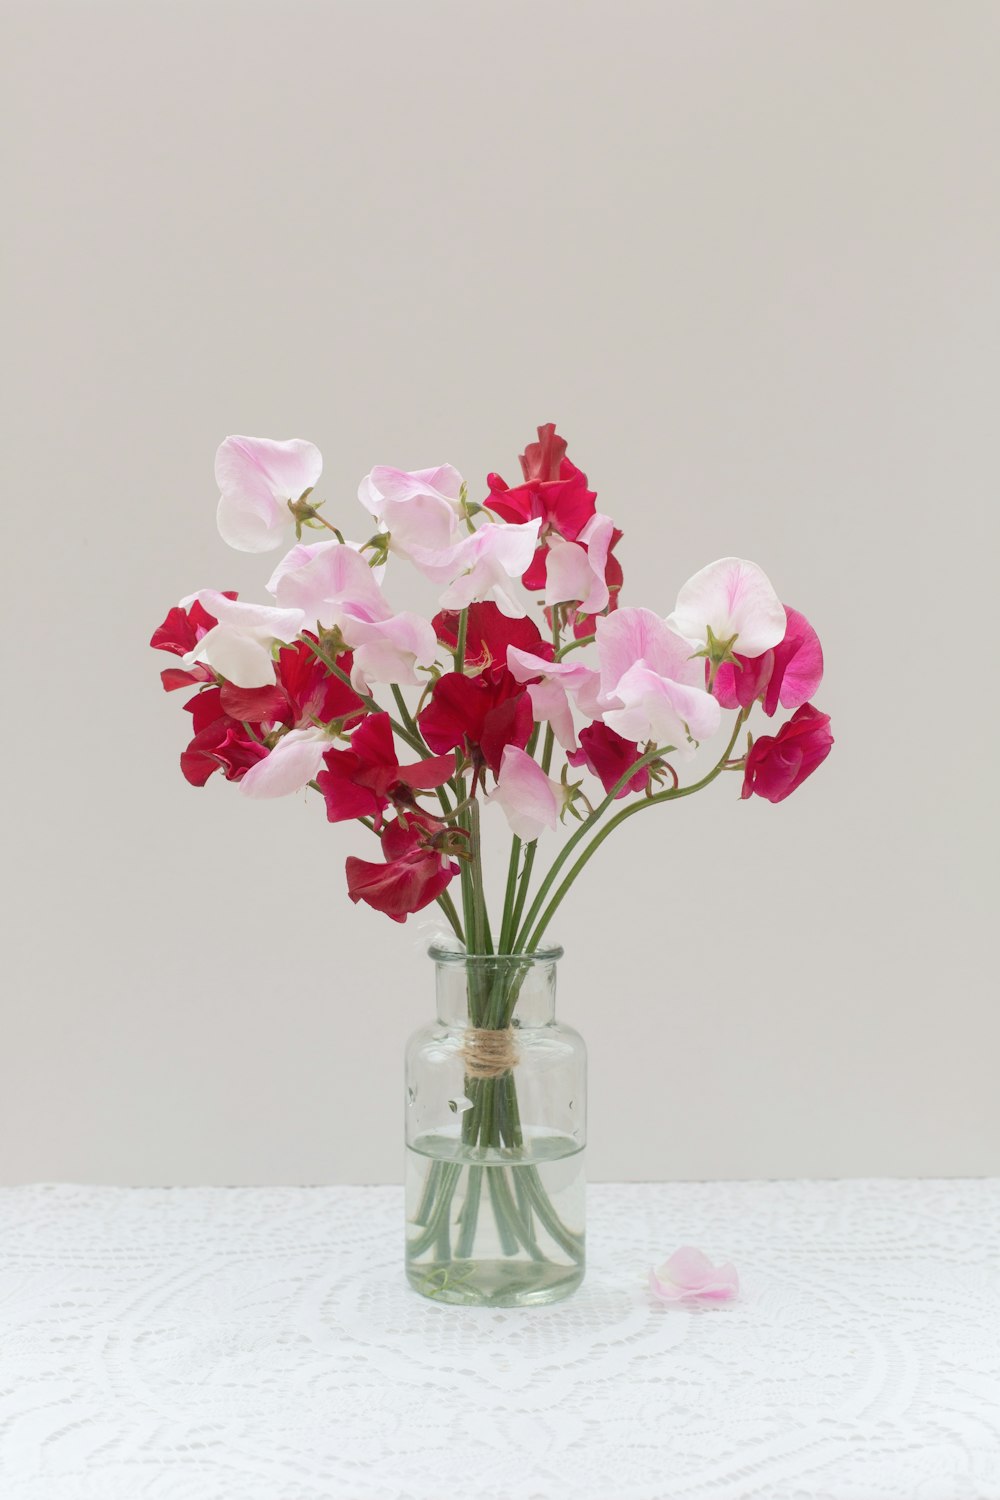 a glass vase filled with pink and white flowers